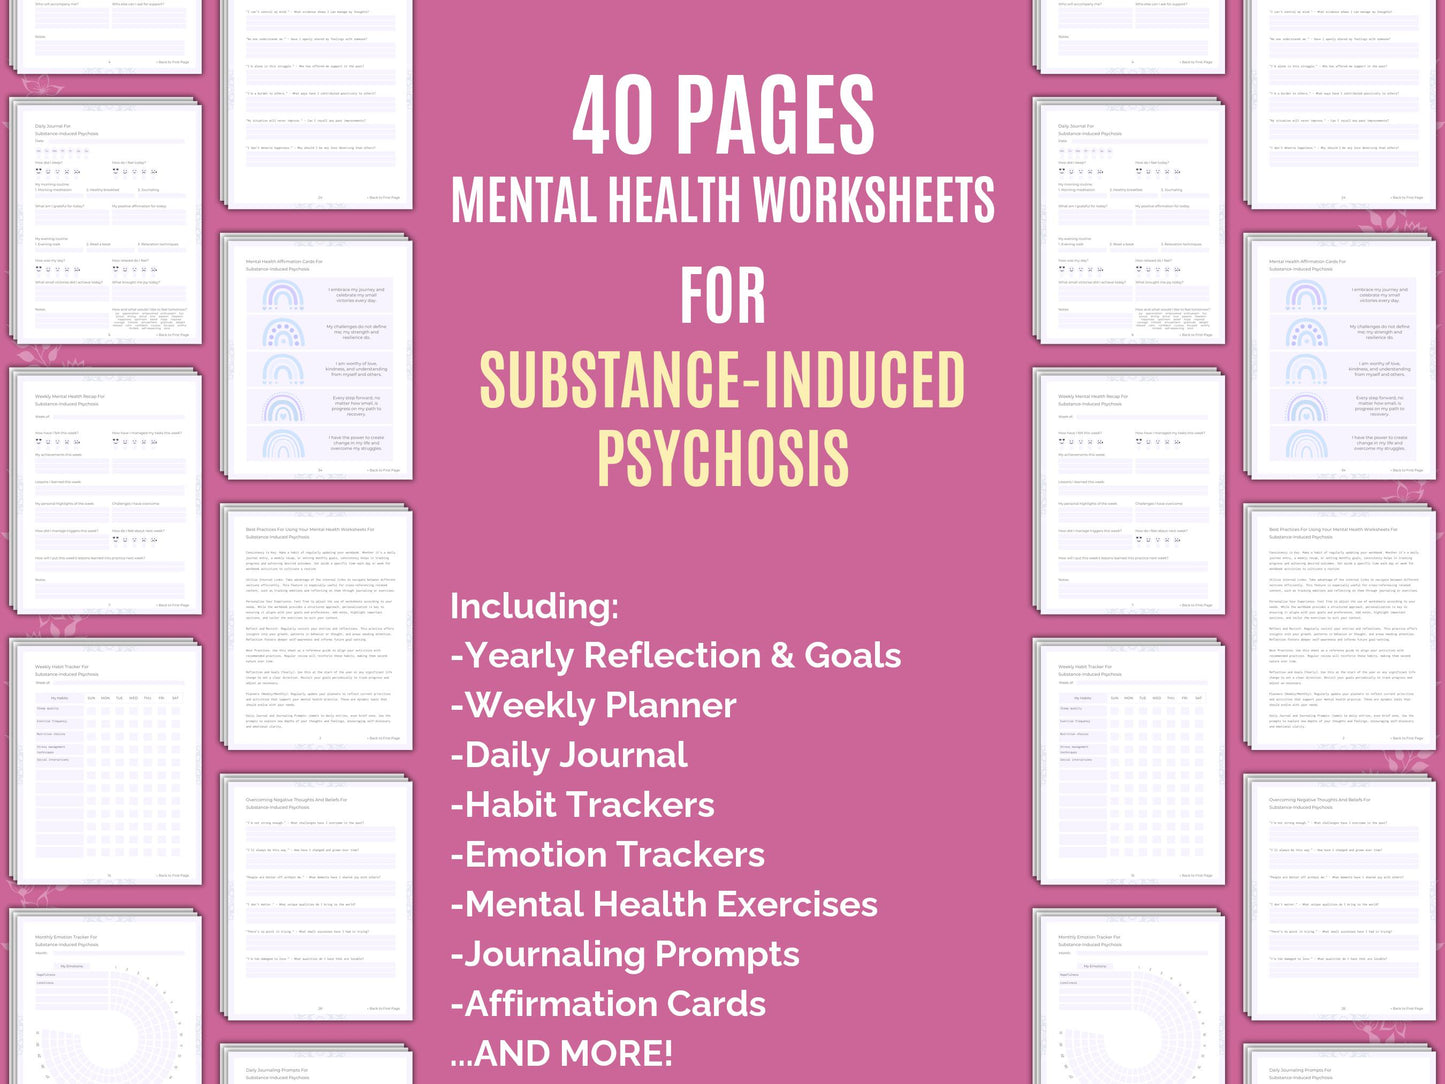 Substance Planners, Substance Resources, Substance Workbooks, Substance Journaling, Induced, Substance Mental Health, Drugs, Substance Tools, Goal Setting, Psychosis, Substance Journals, Substance Templates, Substance Counseling, Substance Notes, Substance Therapy, Cheat Sheet